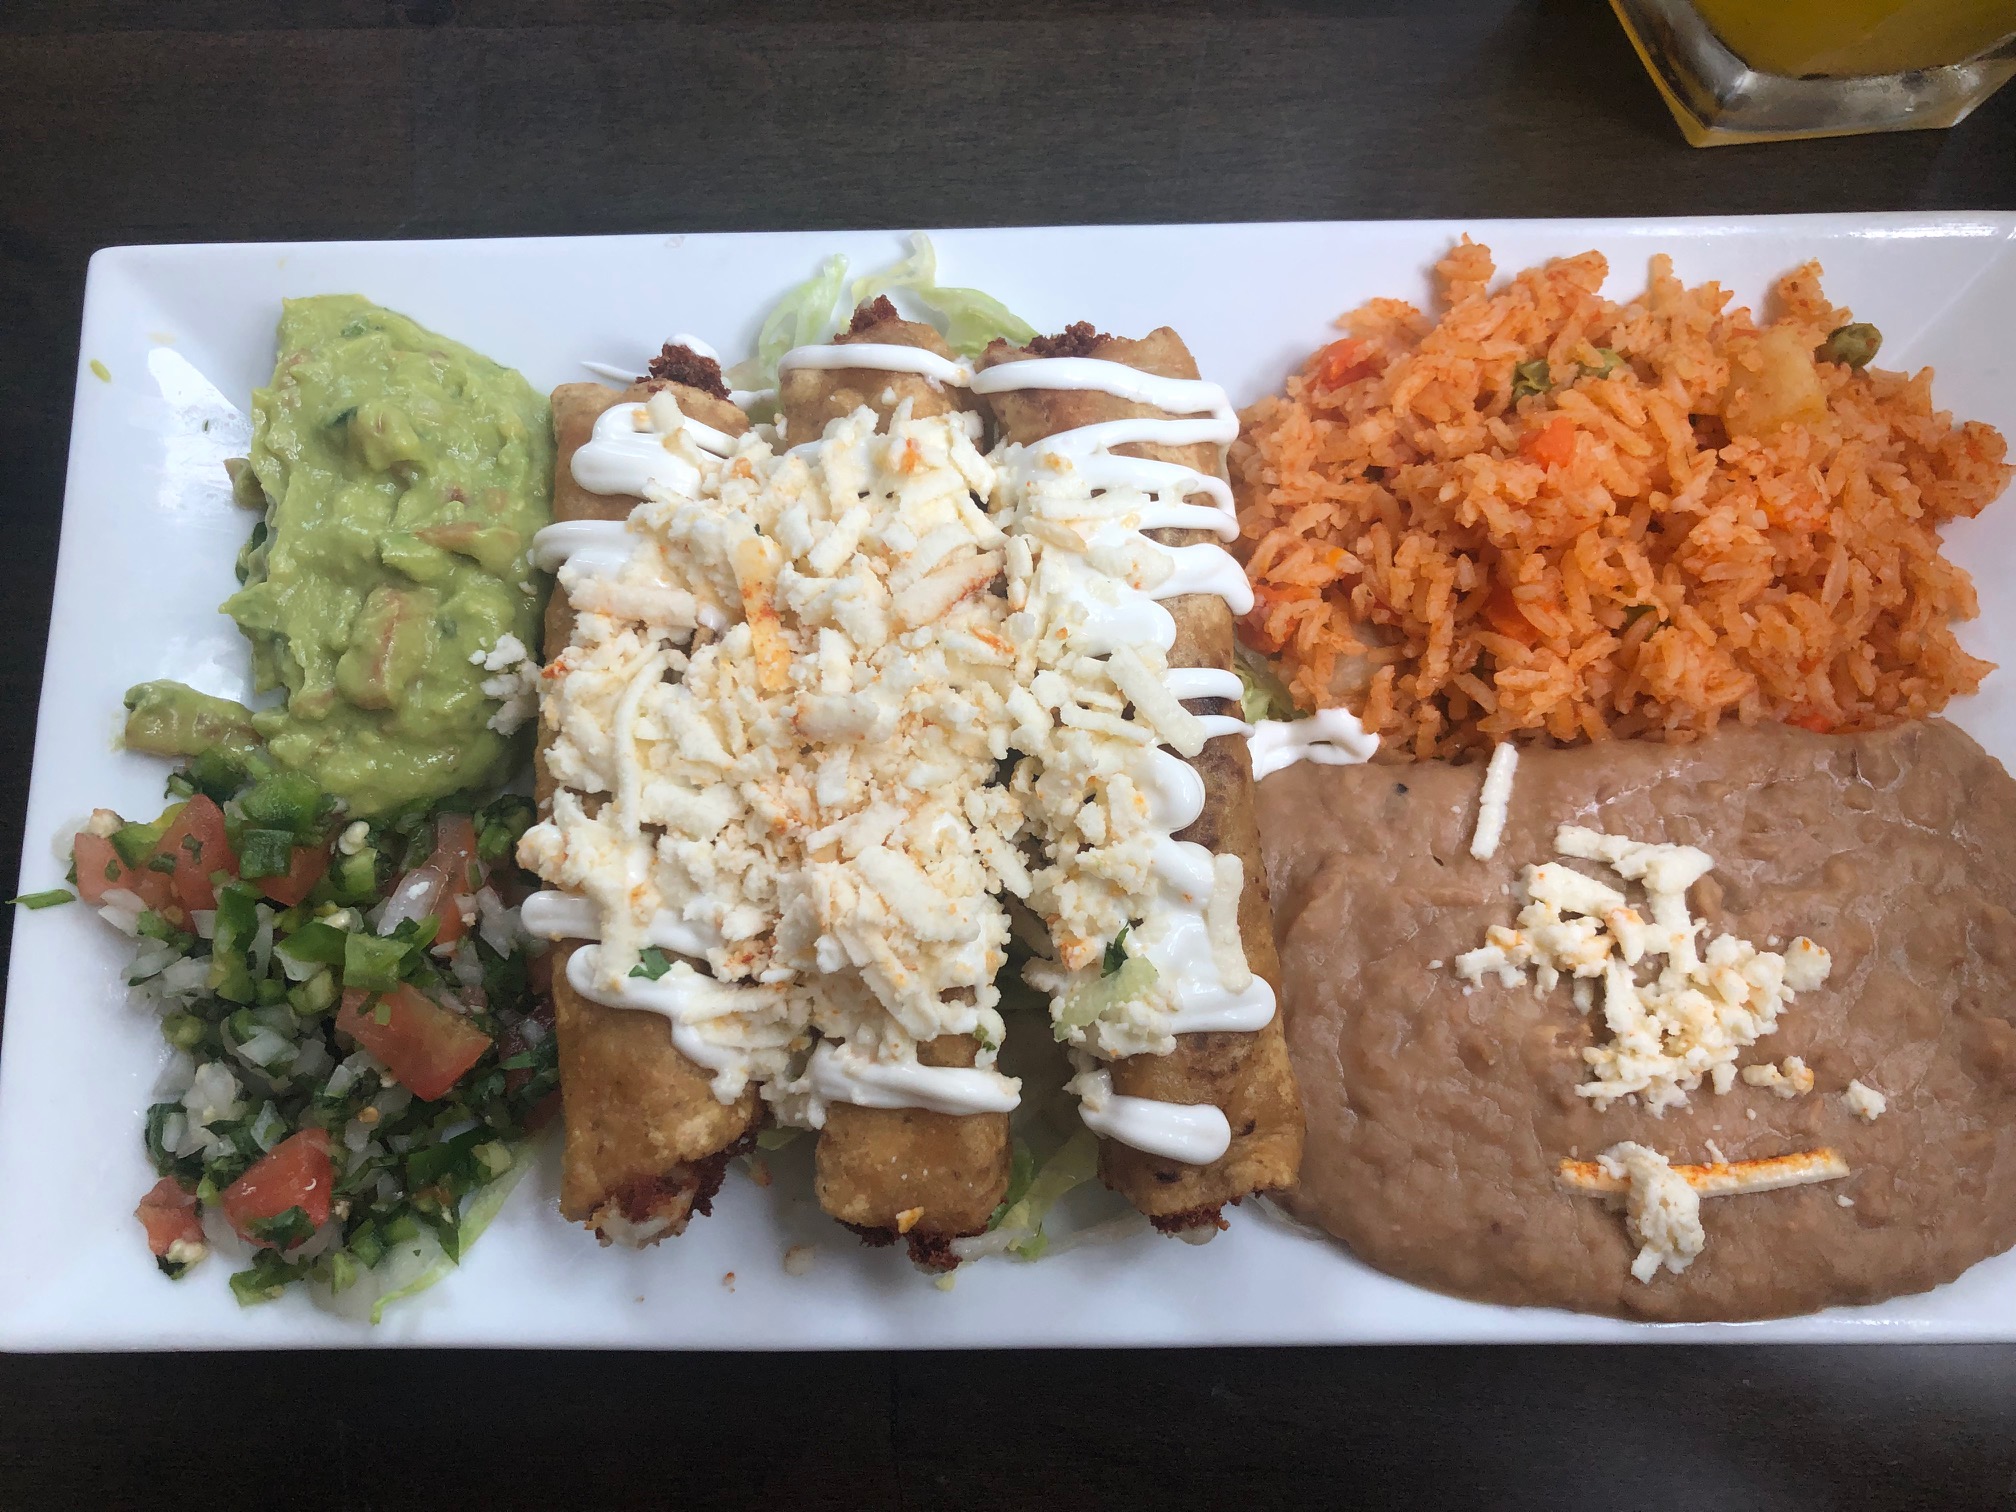 On a rectangular white plate, there is a pile of pico and guac beside three flautas covered in sour cream and cheese beside rice and beans. Photo by Alyssa Buckley.